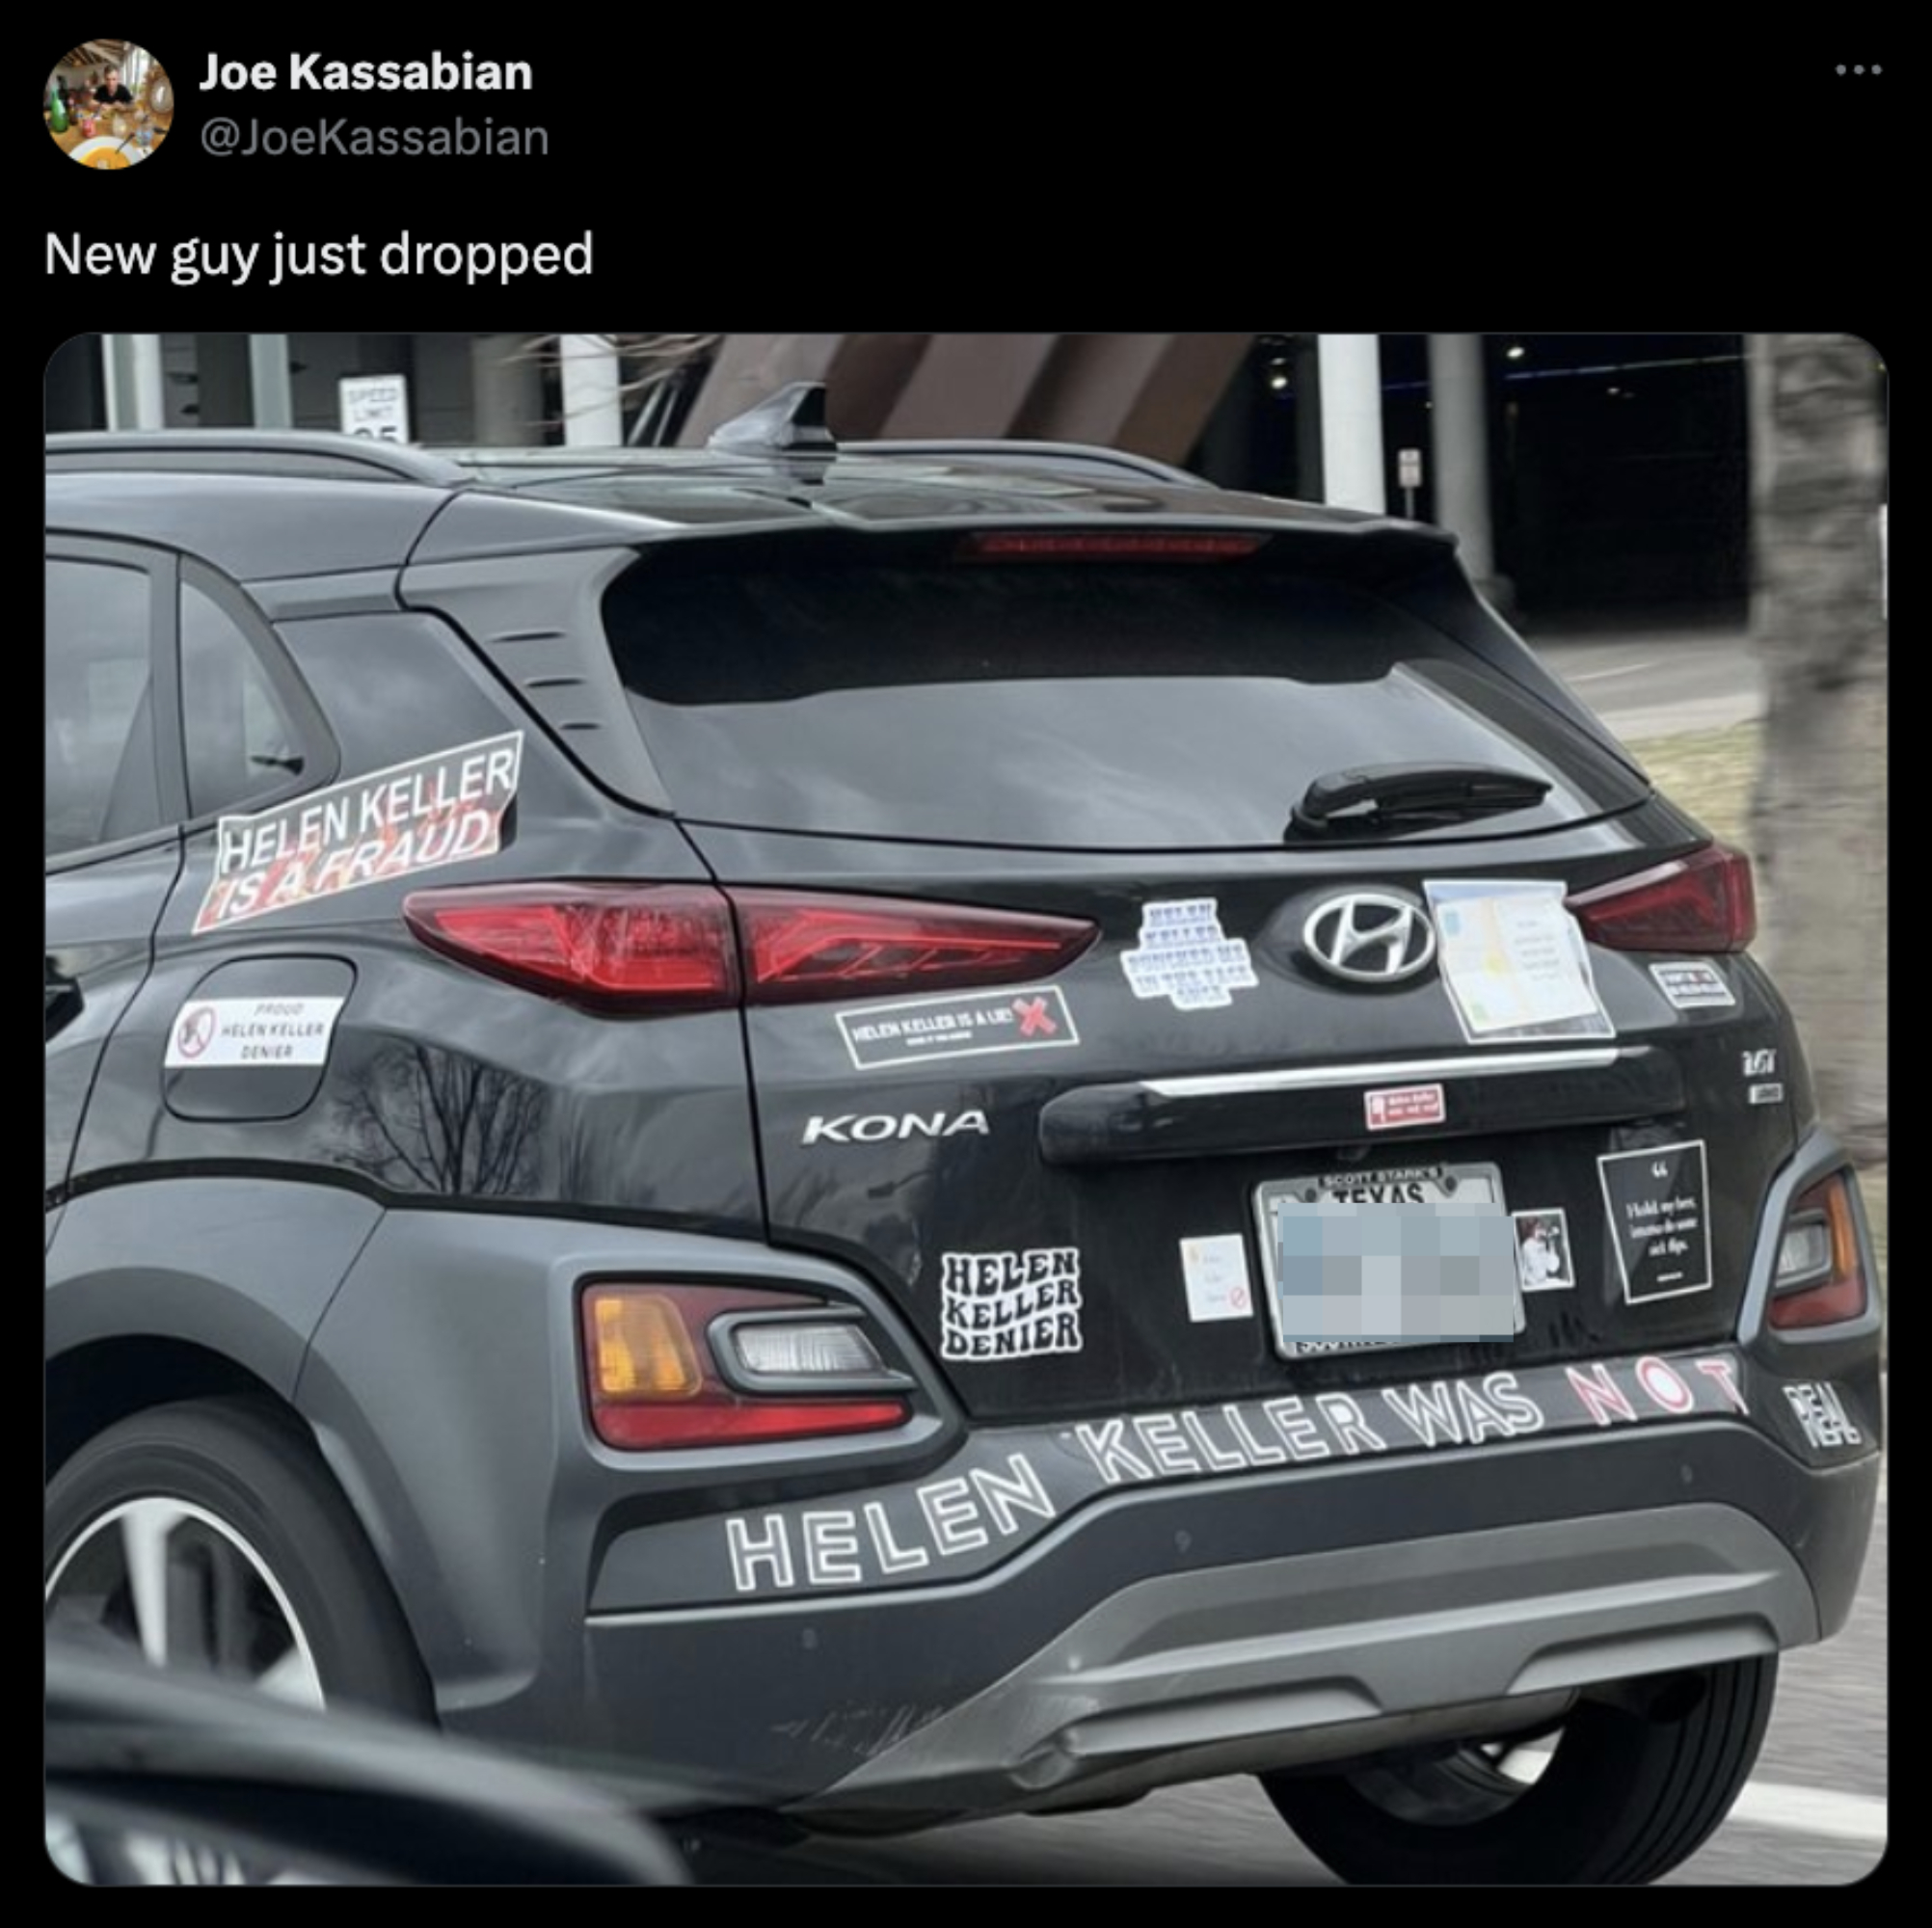 Car with multiple &#x27;Helen Keller is a fraud&#x27; stickers, internet meme-centric decorations, in motion on the street